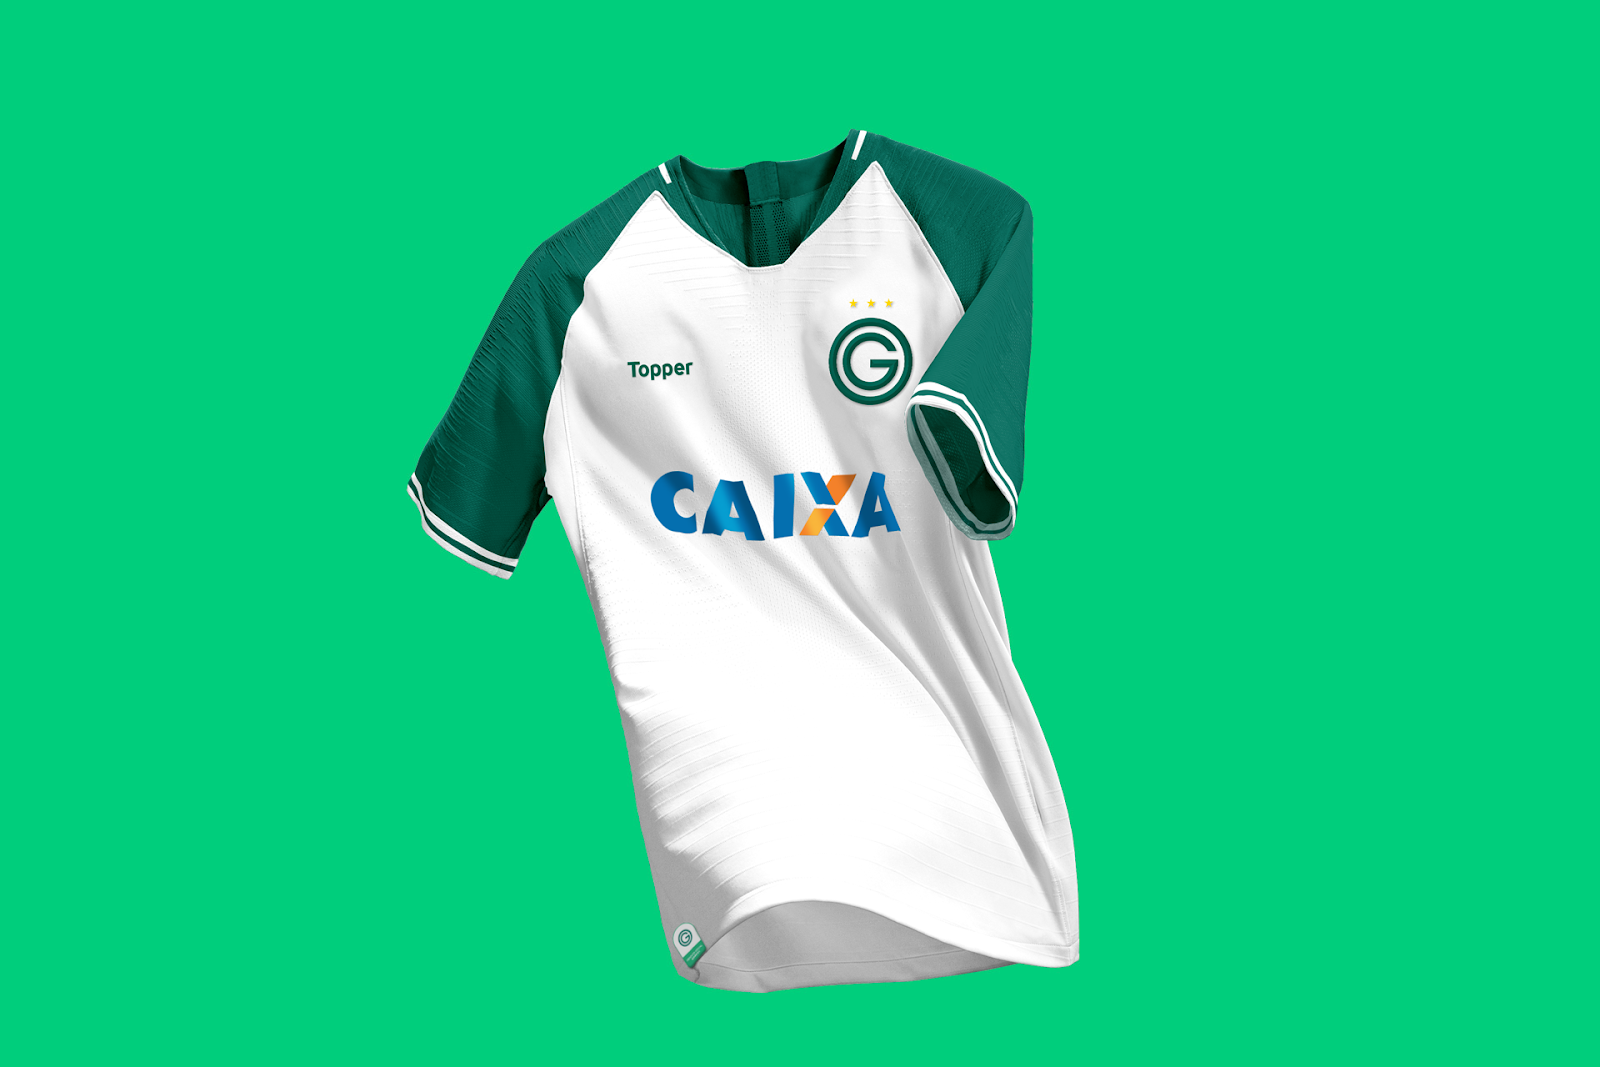 Page from the Brand Identity Manual for the Goias Soccer Team